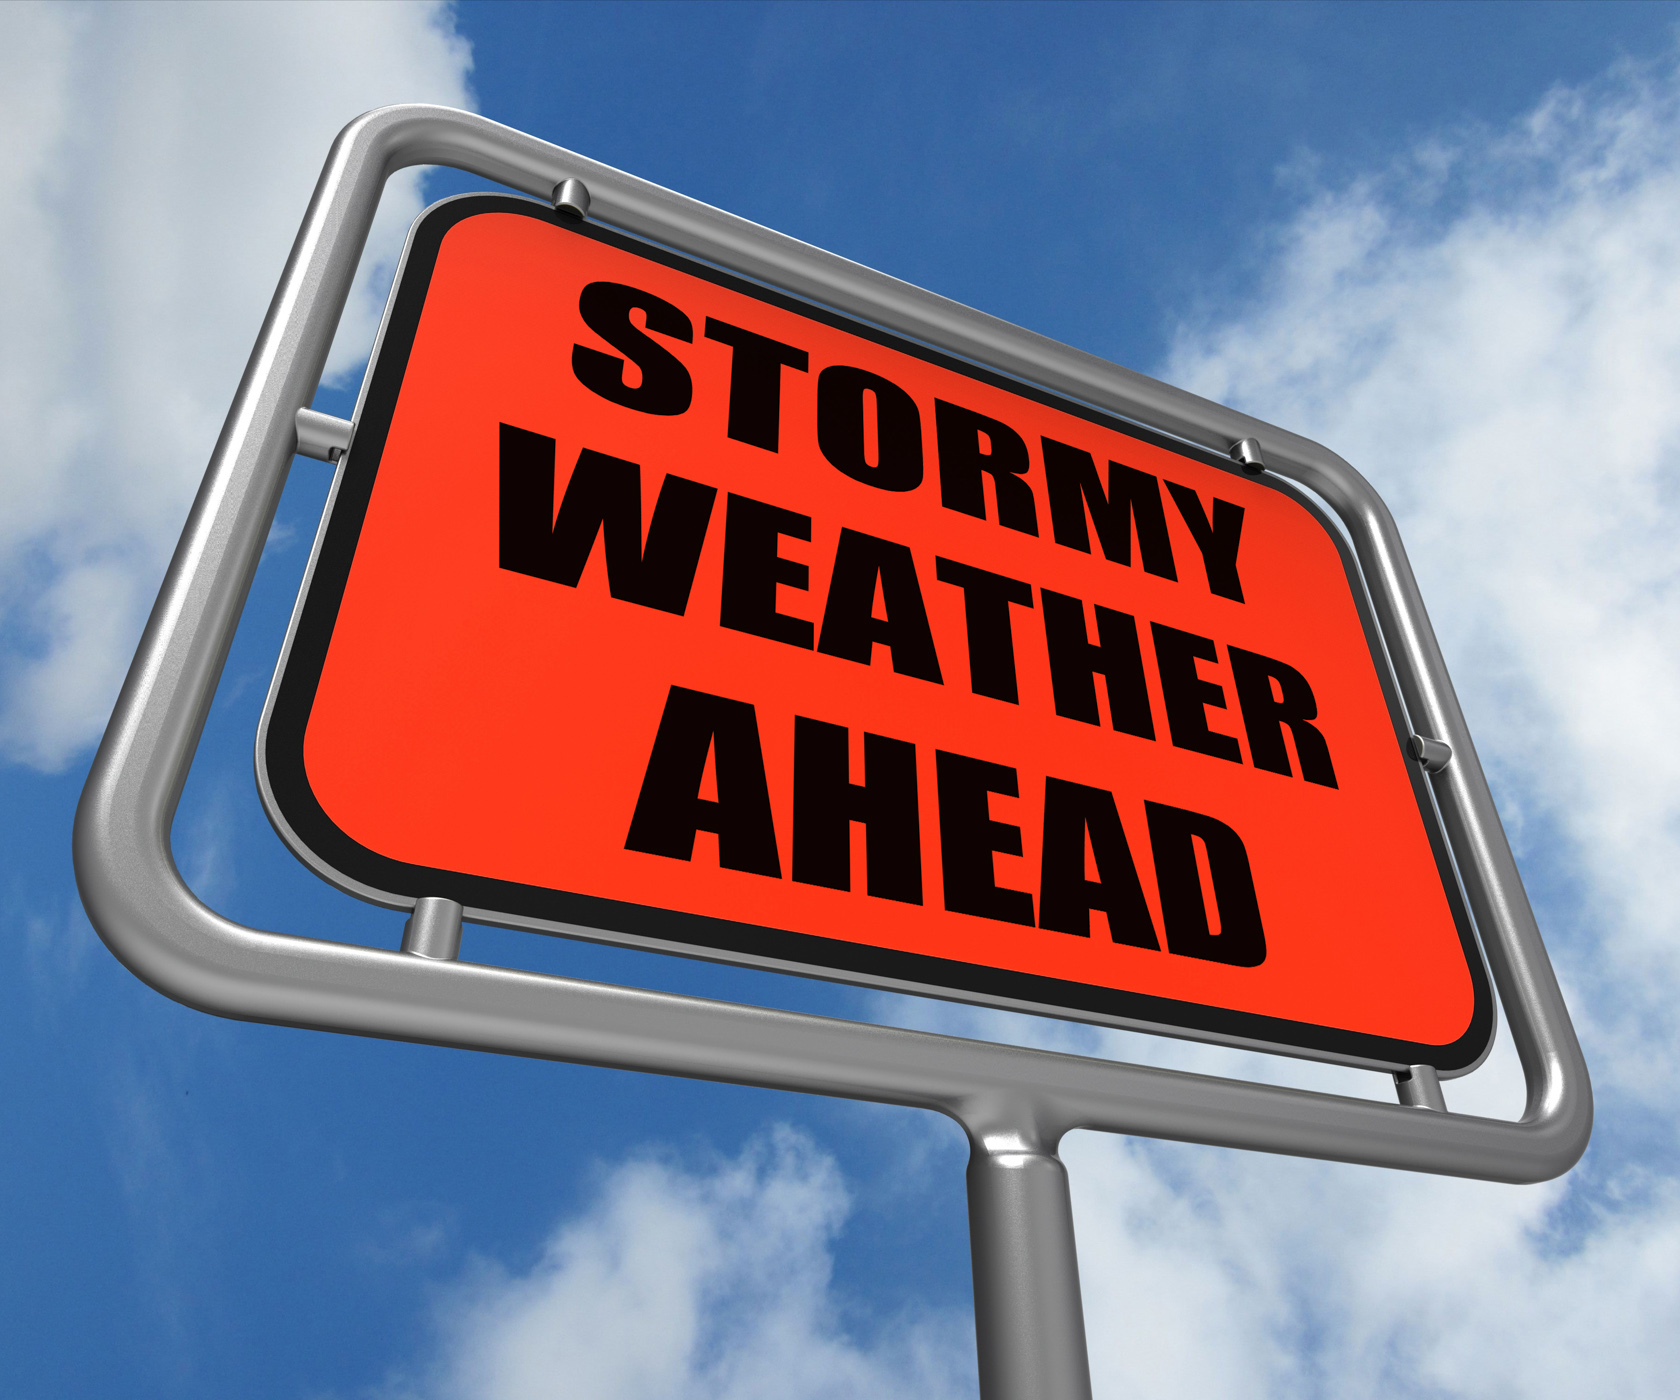 Stormy Weather Ahead Sign Shows Storm Warning or Danger, Ahead, Risky, Warning, Takecare, HQ Photo